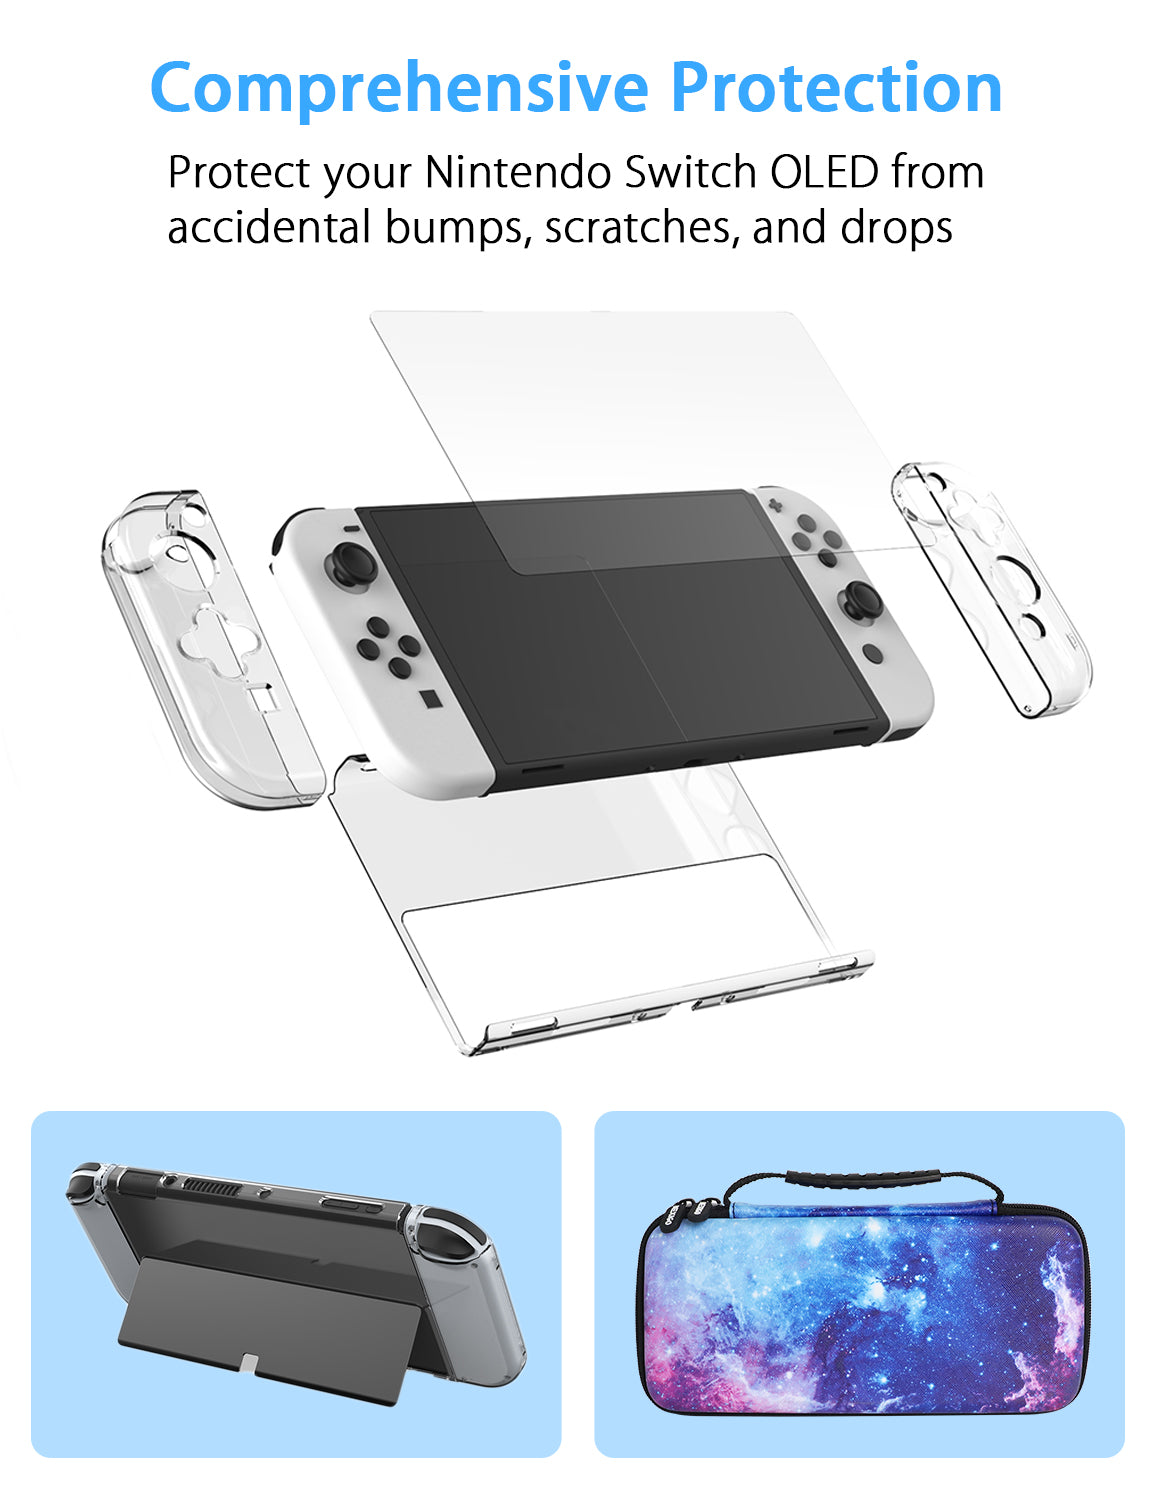 Protector offers protection for your Switch OLED, safe guarding against accidental bumps, scratches.